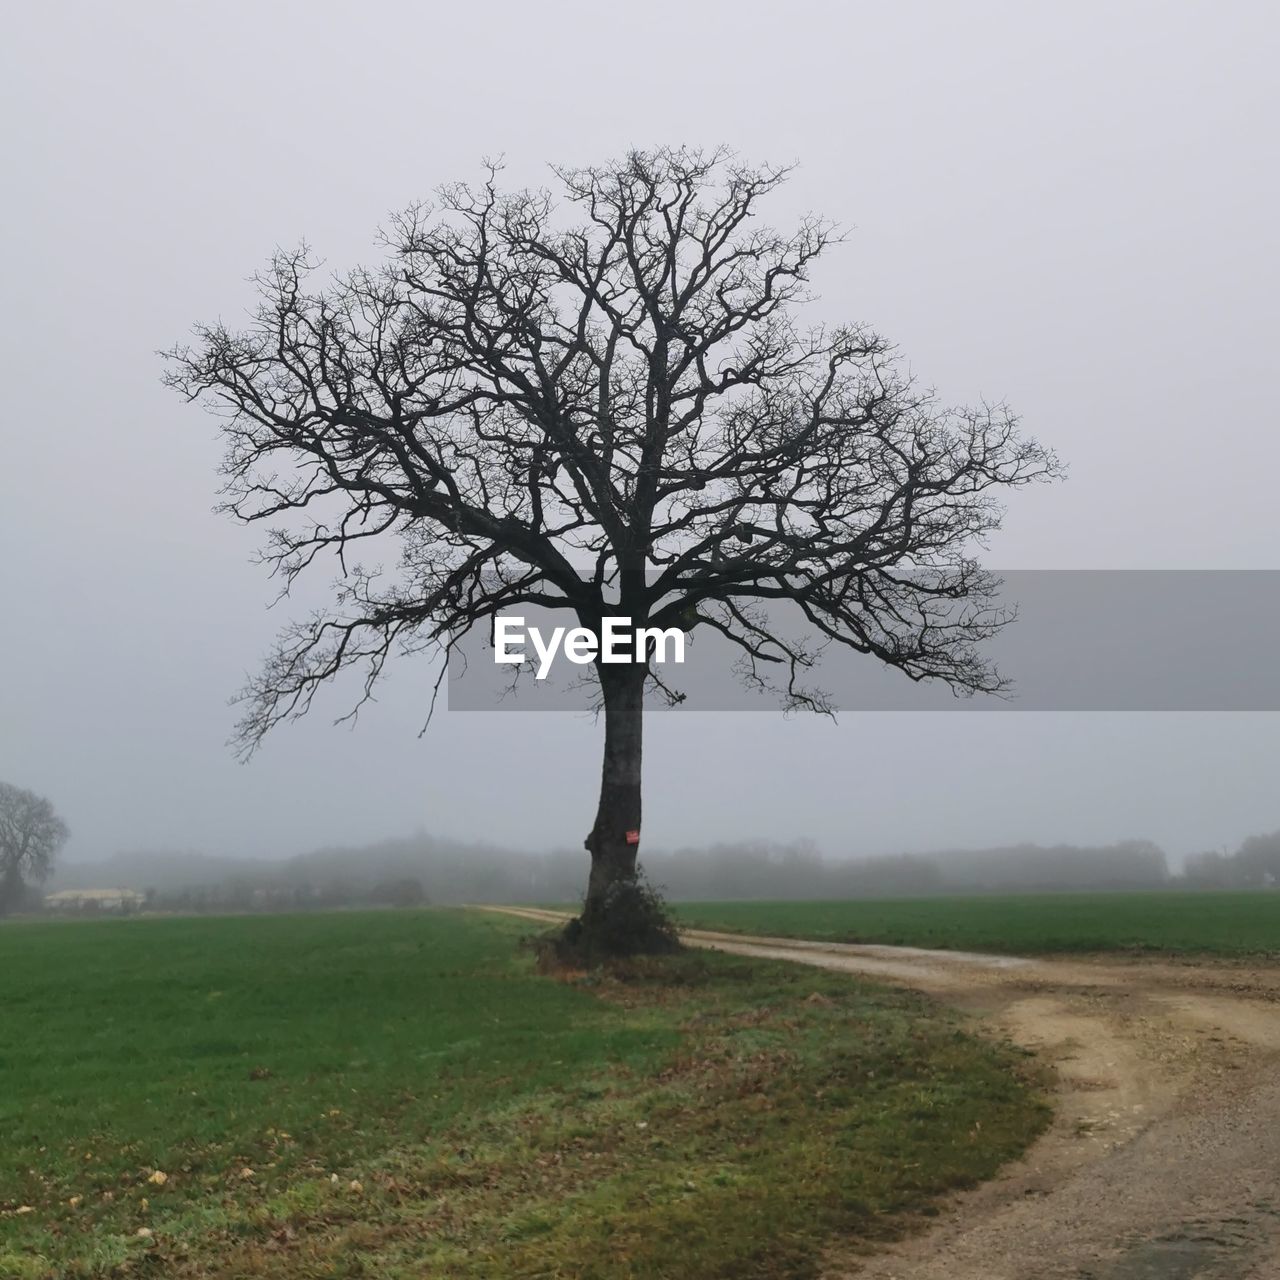 tree, plant, fog, environment, landscape, nature, grass, sky, bare tree, field, land, no people, mist, beauty in nature, tranquility, morning, branch, scenics - nature, rural area, outdoors, rural scene, tranquil scene, tree trunk, trunk, single tree, non-urban scene